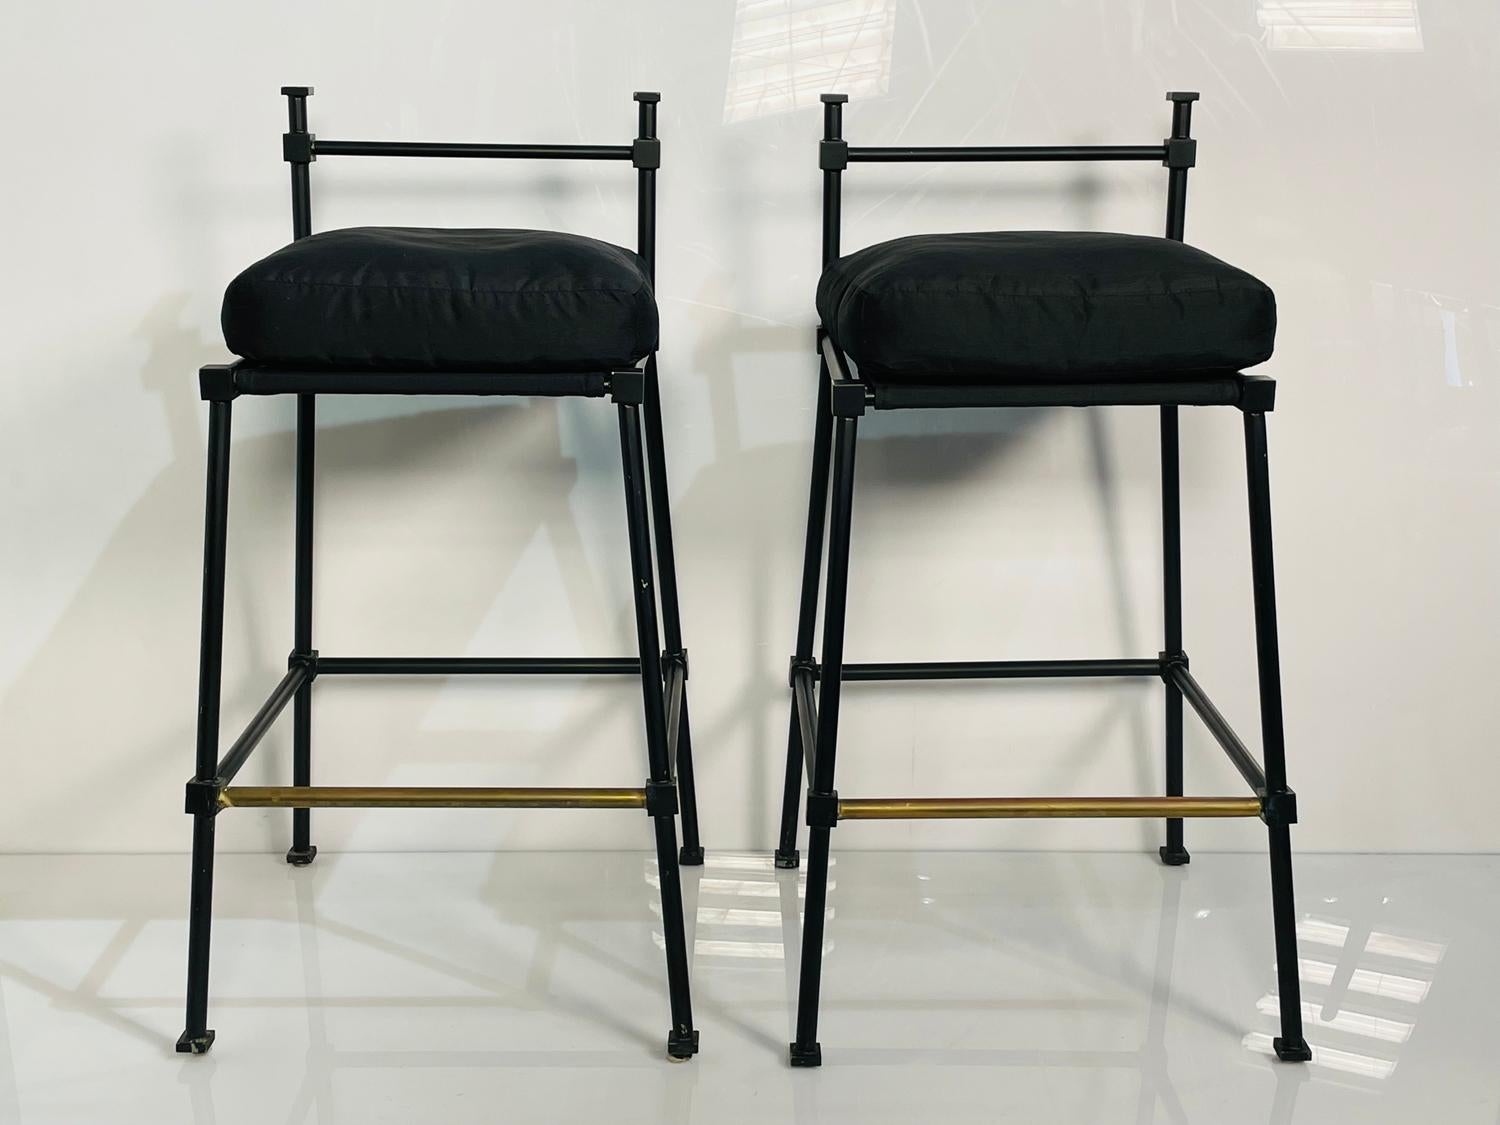 Beautiful pair of barstools made in solid steel with a black powder finish.

The stools are heavy and well made.

Measurements:
35 inches high x 19 inches wide x 19 inches deep x 29 inches seat height.